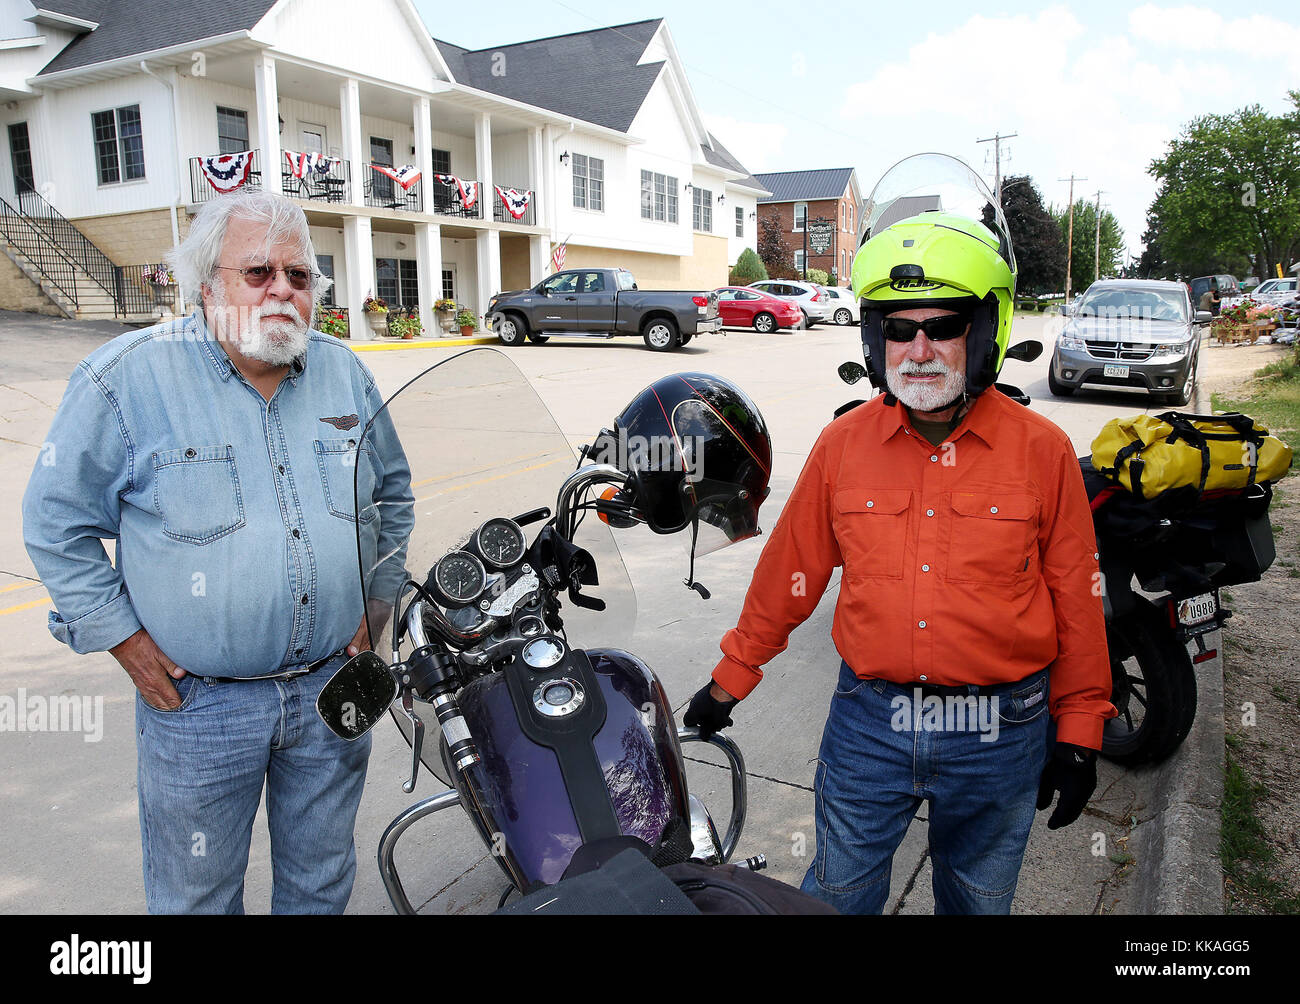 Iowa, USA. 13th June, 2017. Thad Knight, left of New Mexico and Kelly Clark of Texas prepare to continue on their journey to cross every operational ferry on the Mississippi River after stopping at Breitbach's Country Dining in Balltown, Iowa Tuesday June 13, 2017. The pair was told about the Iowa eating establishment after crossing the river on the Cassville Car Ferry which connects the Great River Road and the Iowa Great River Road. The ferry served the early settlement as far back as 1833 and continues today. It is the oldest operating ferry service in the state of Wisconsin. (Credit Image Stock Photo